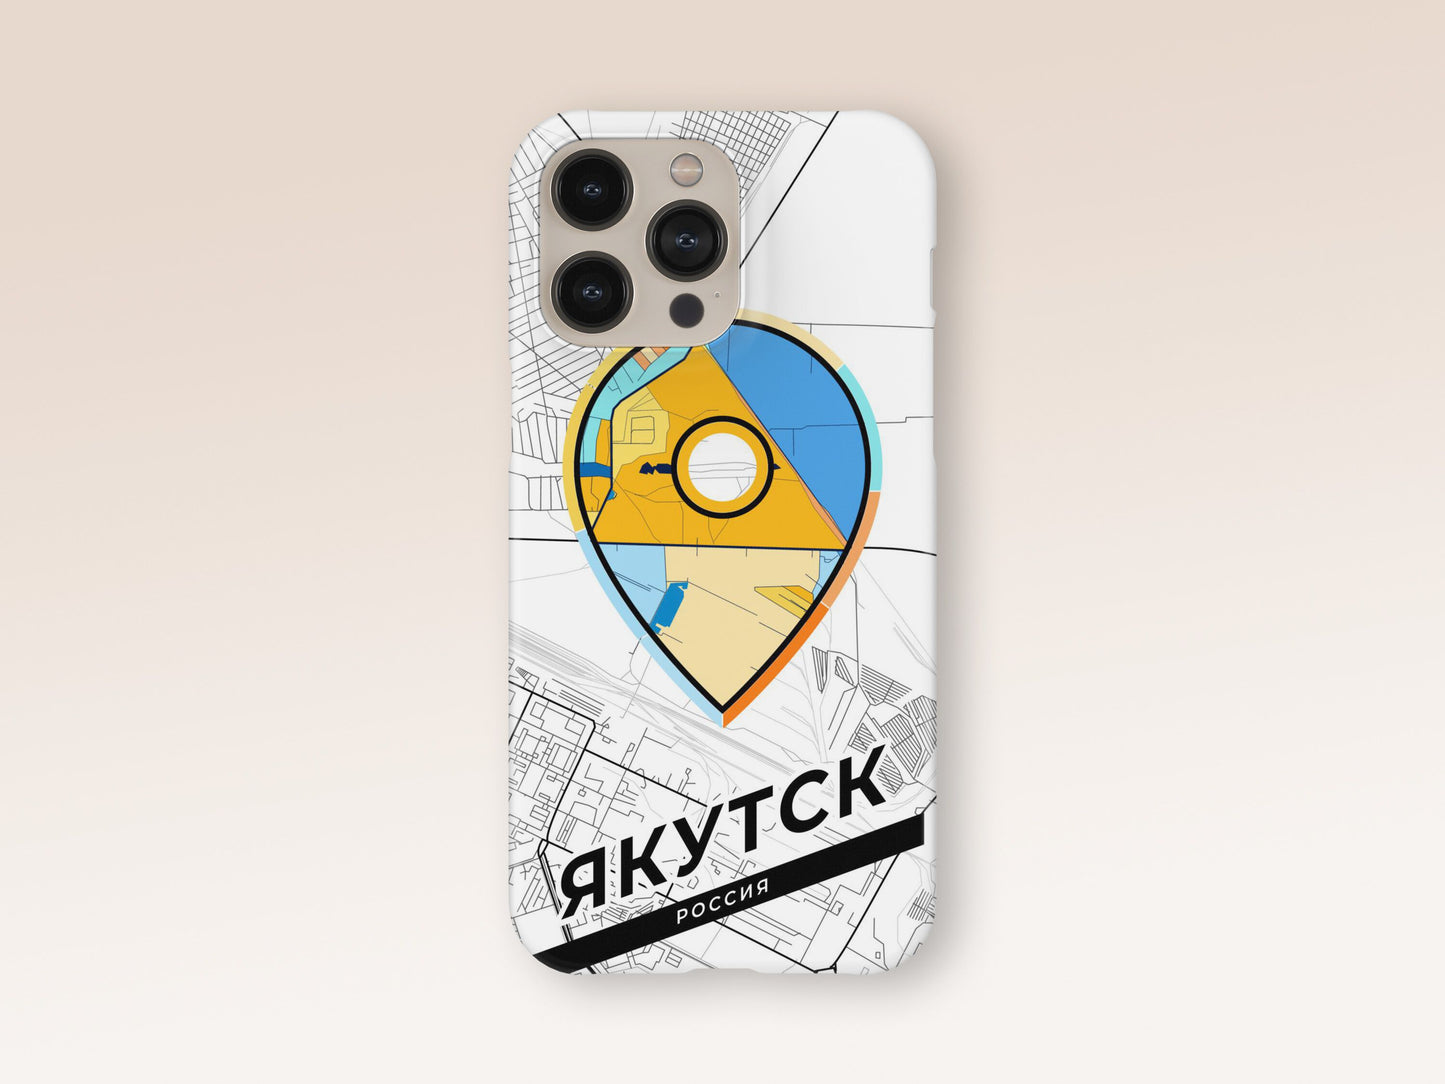 Yakutsk Russia slim phone case with colorful icon 1